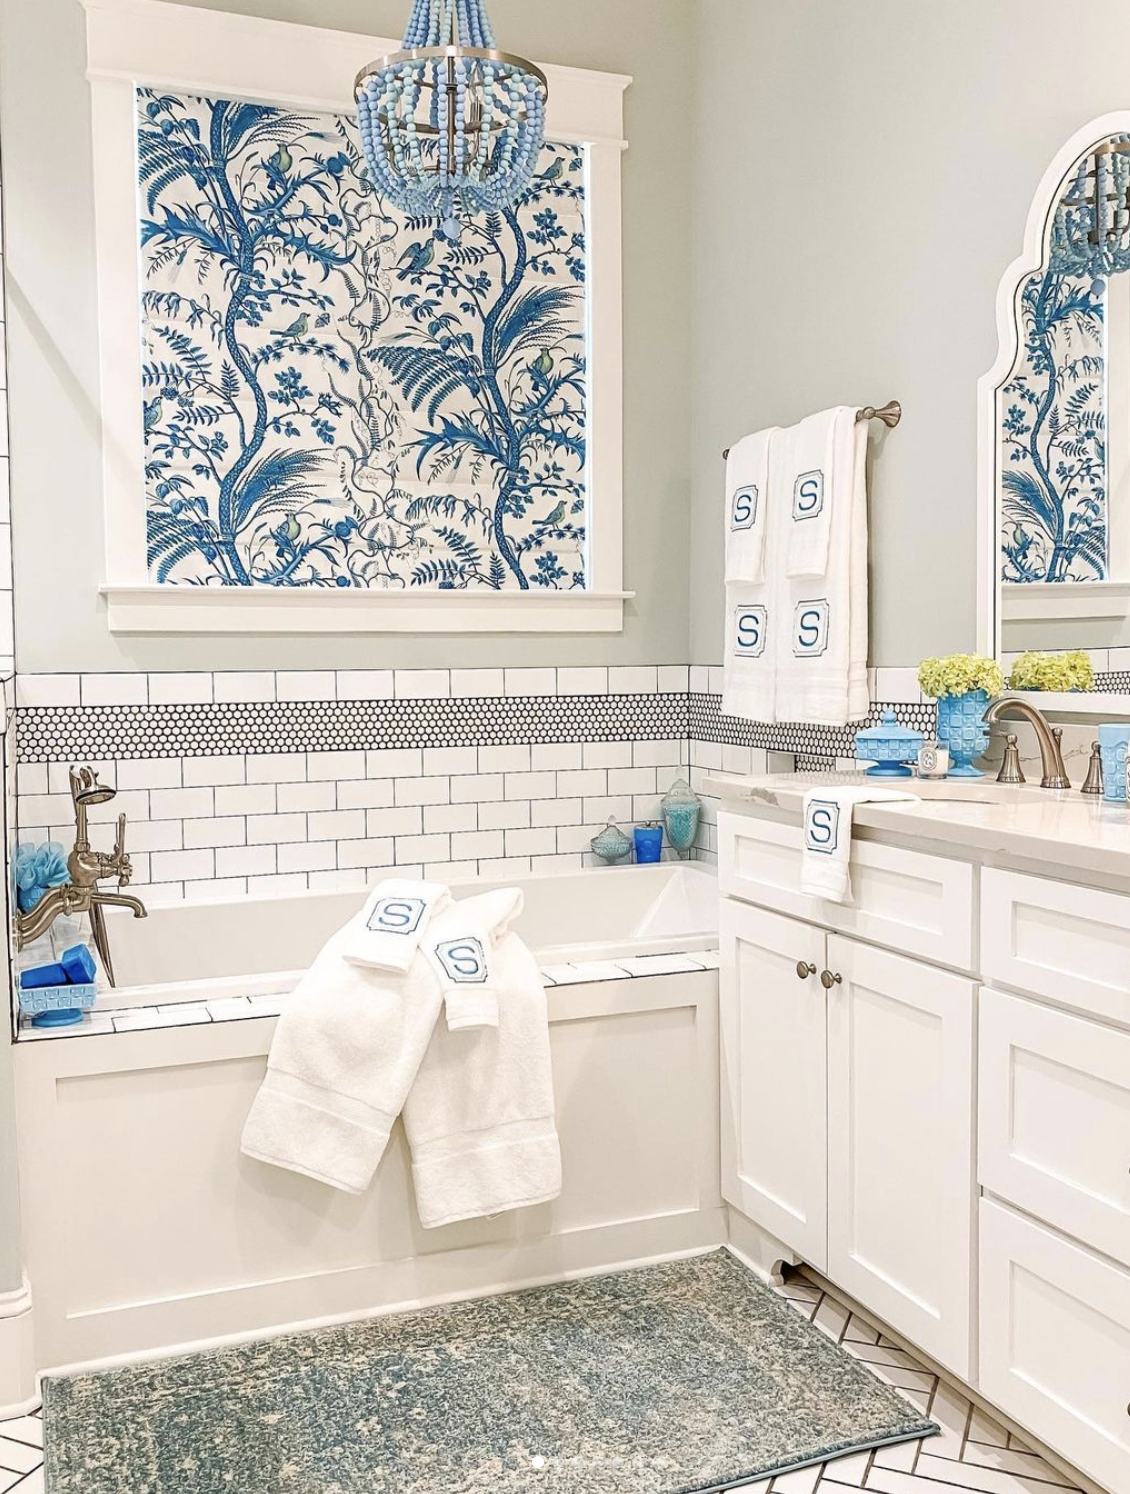 Gorgeous traditional blue and white bathroom with drop in tub kellyelko.com